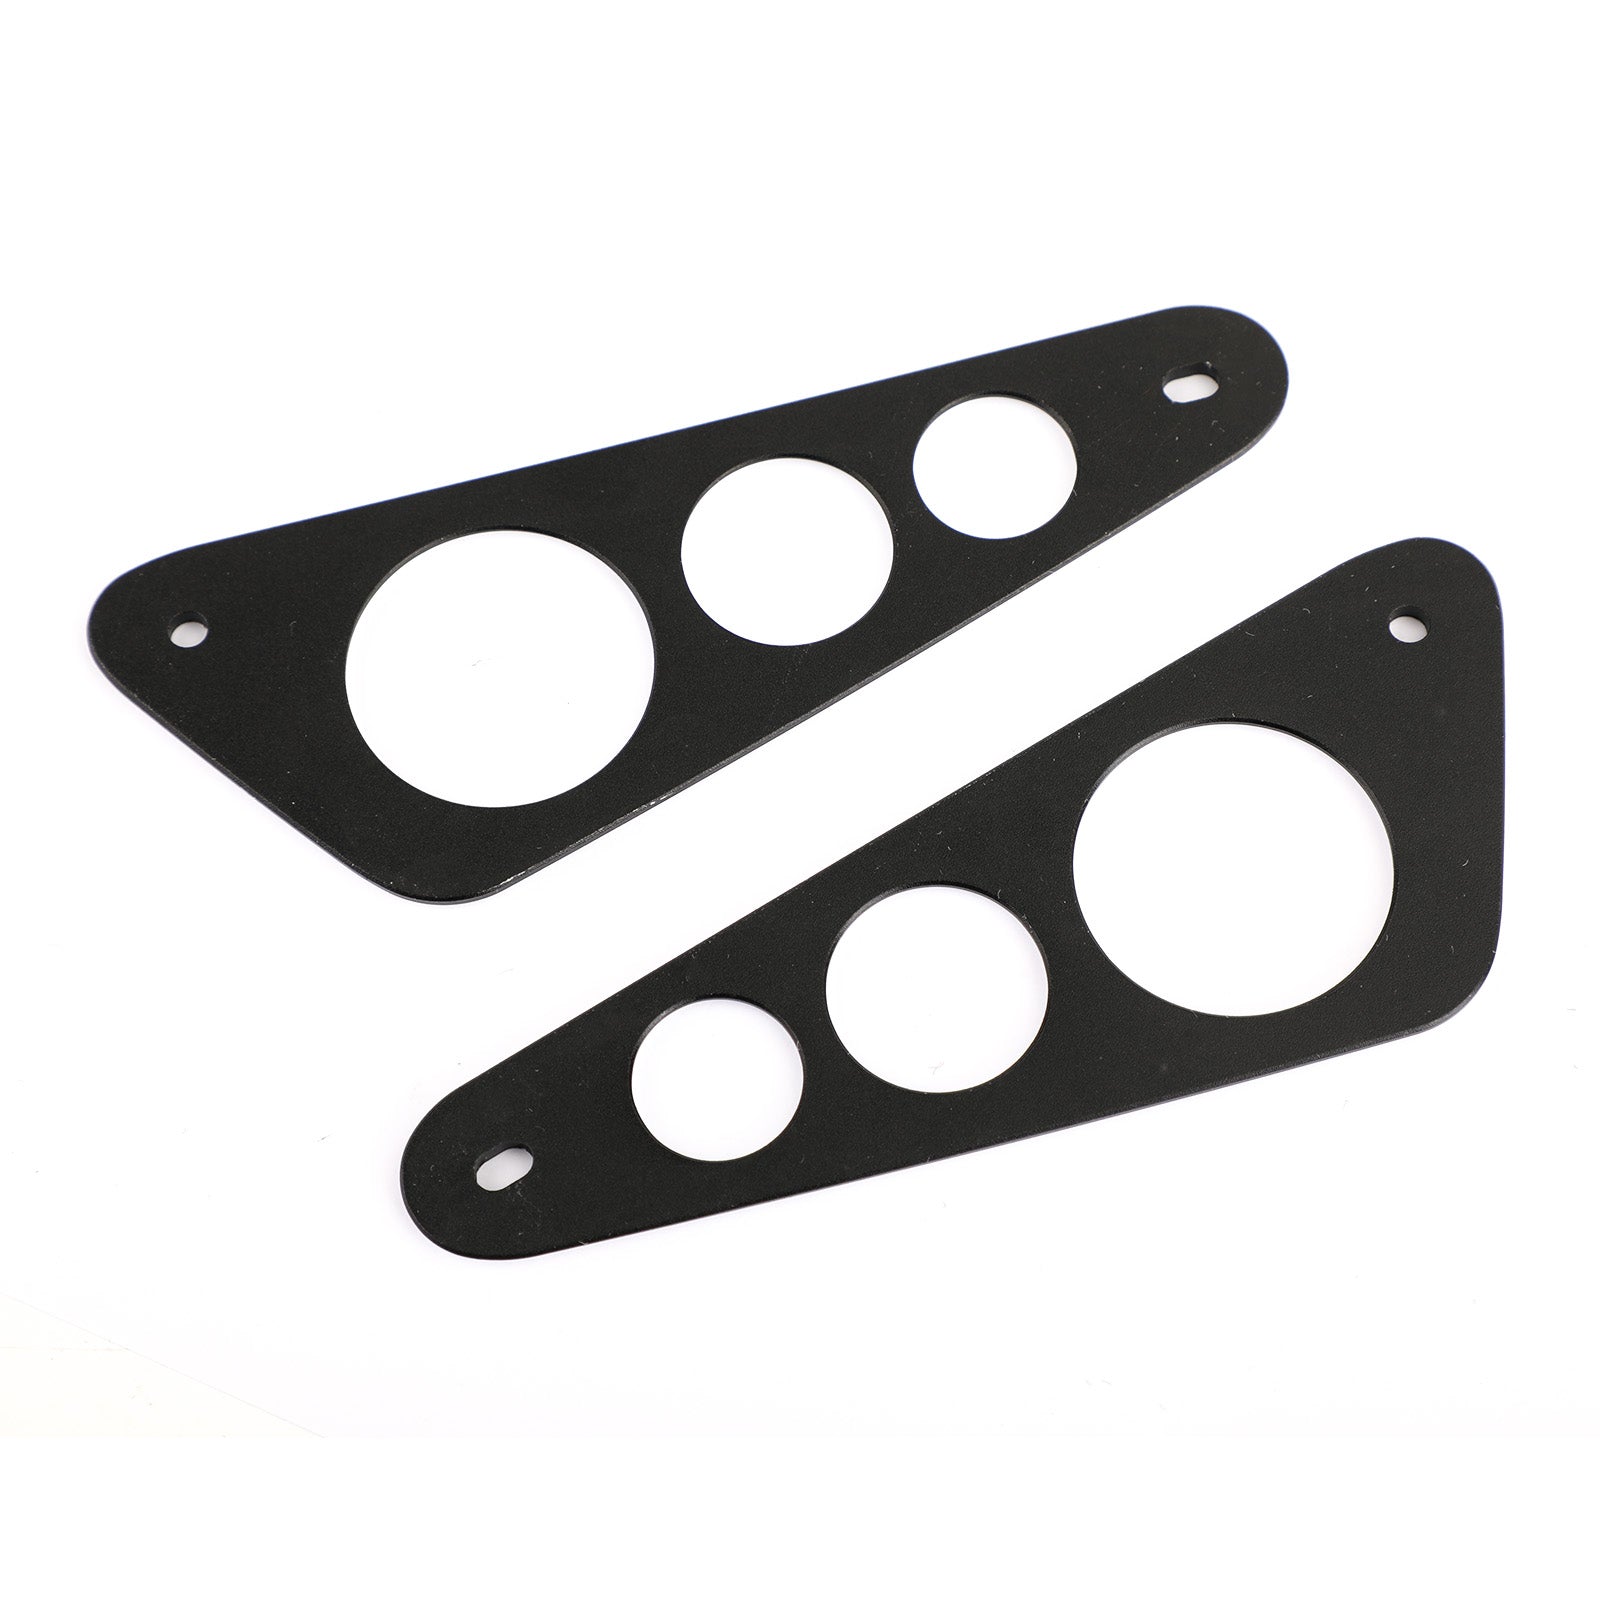 Rear Panel Guard Side Cover Plate Protector for YAMAHA XSR155 2019-2020 Black